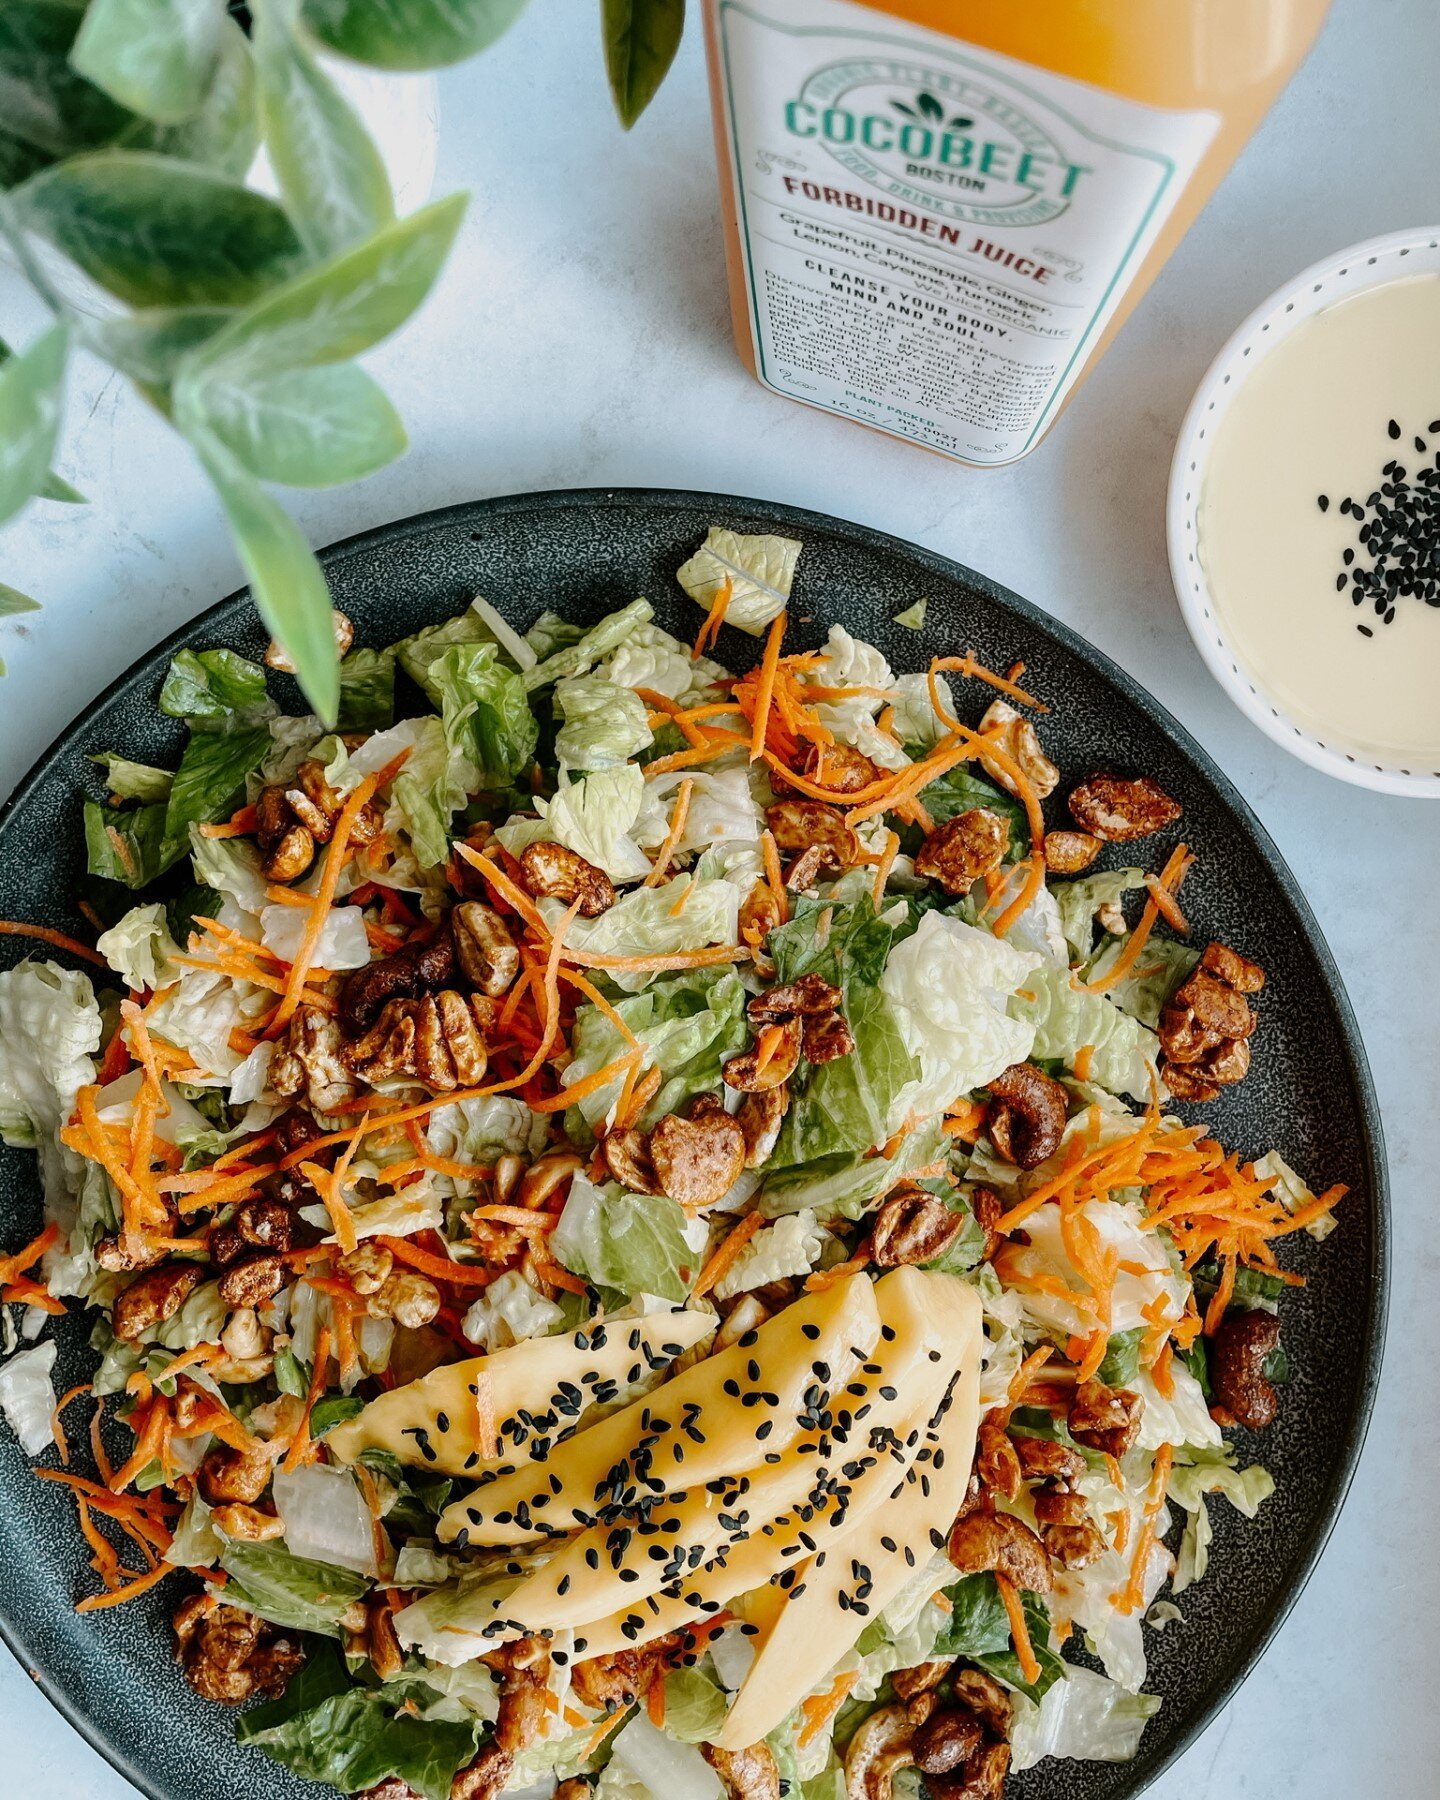 #TropicalStateOfMind 🌴 Our delicious and nutritious-packed TULUM SUNSET SALAD is a perfect combination of savory and sweet! Romaine, carrots, mango, lemon grass, cashews, sunflower sprouts, olive oil, ginger, sesame seeds, sea salt, cayenne and coco